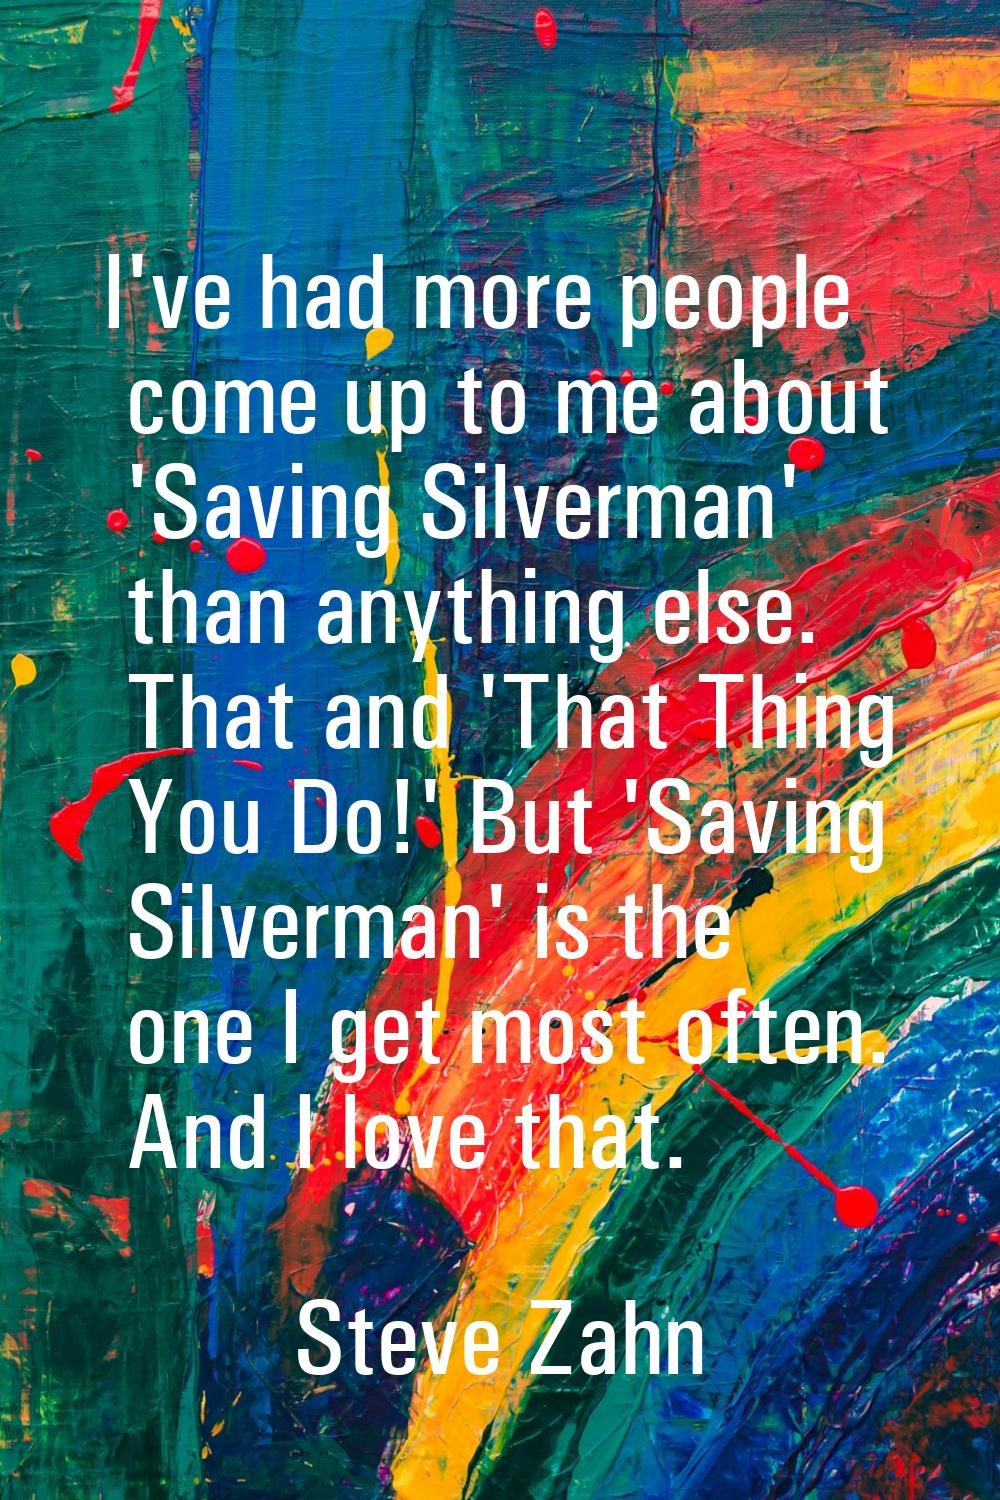 I've had more people come up to me about 'Saving Silverman' than anything else. That and 'That Thin